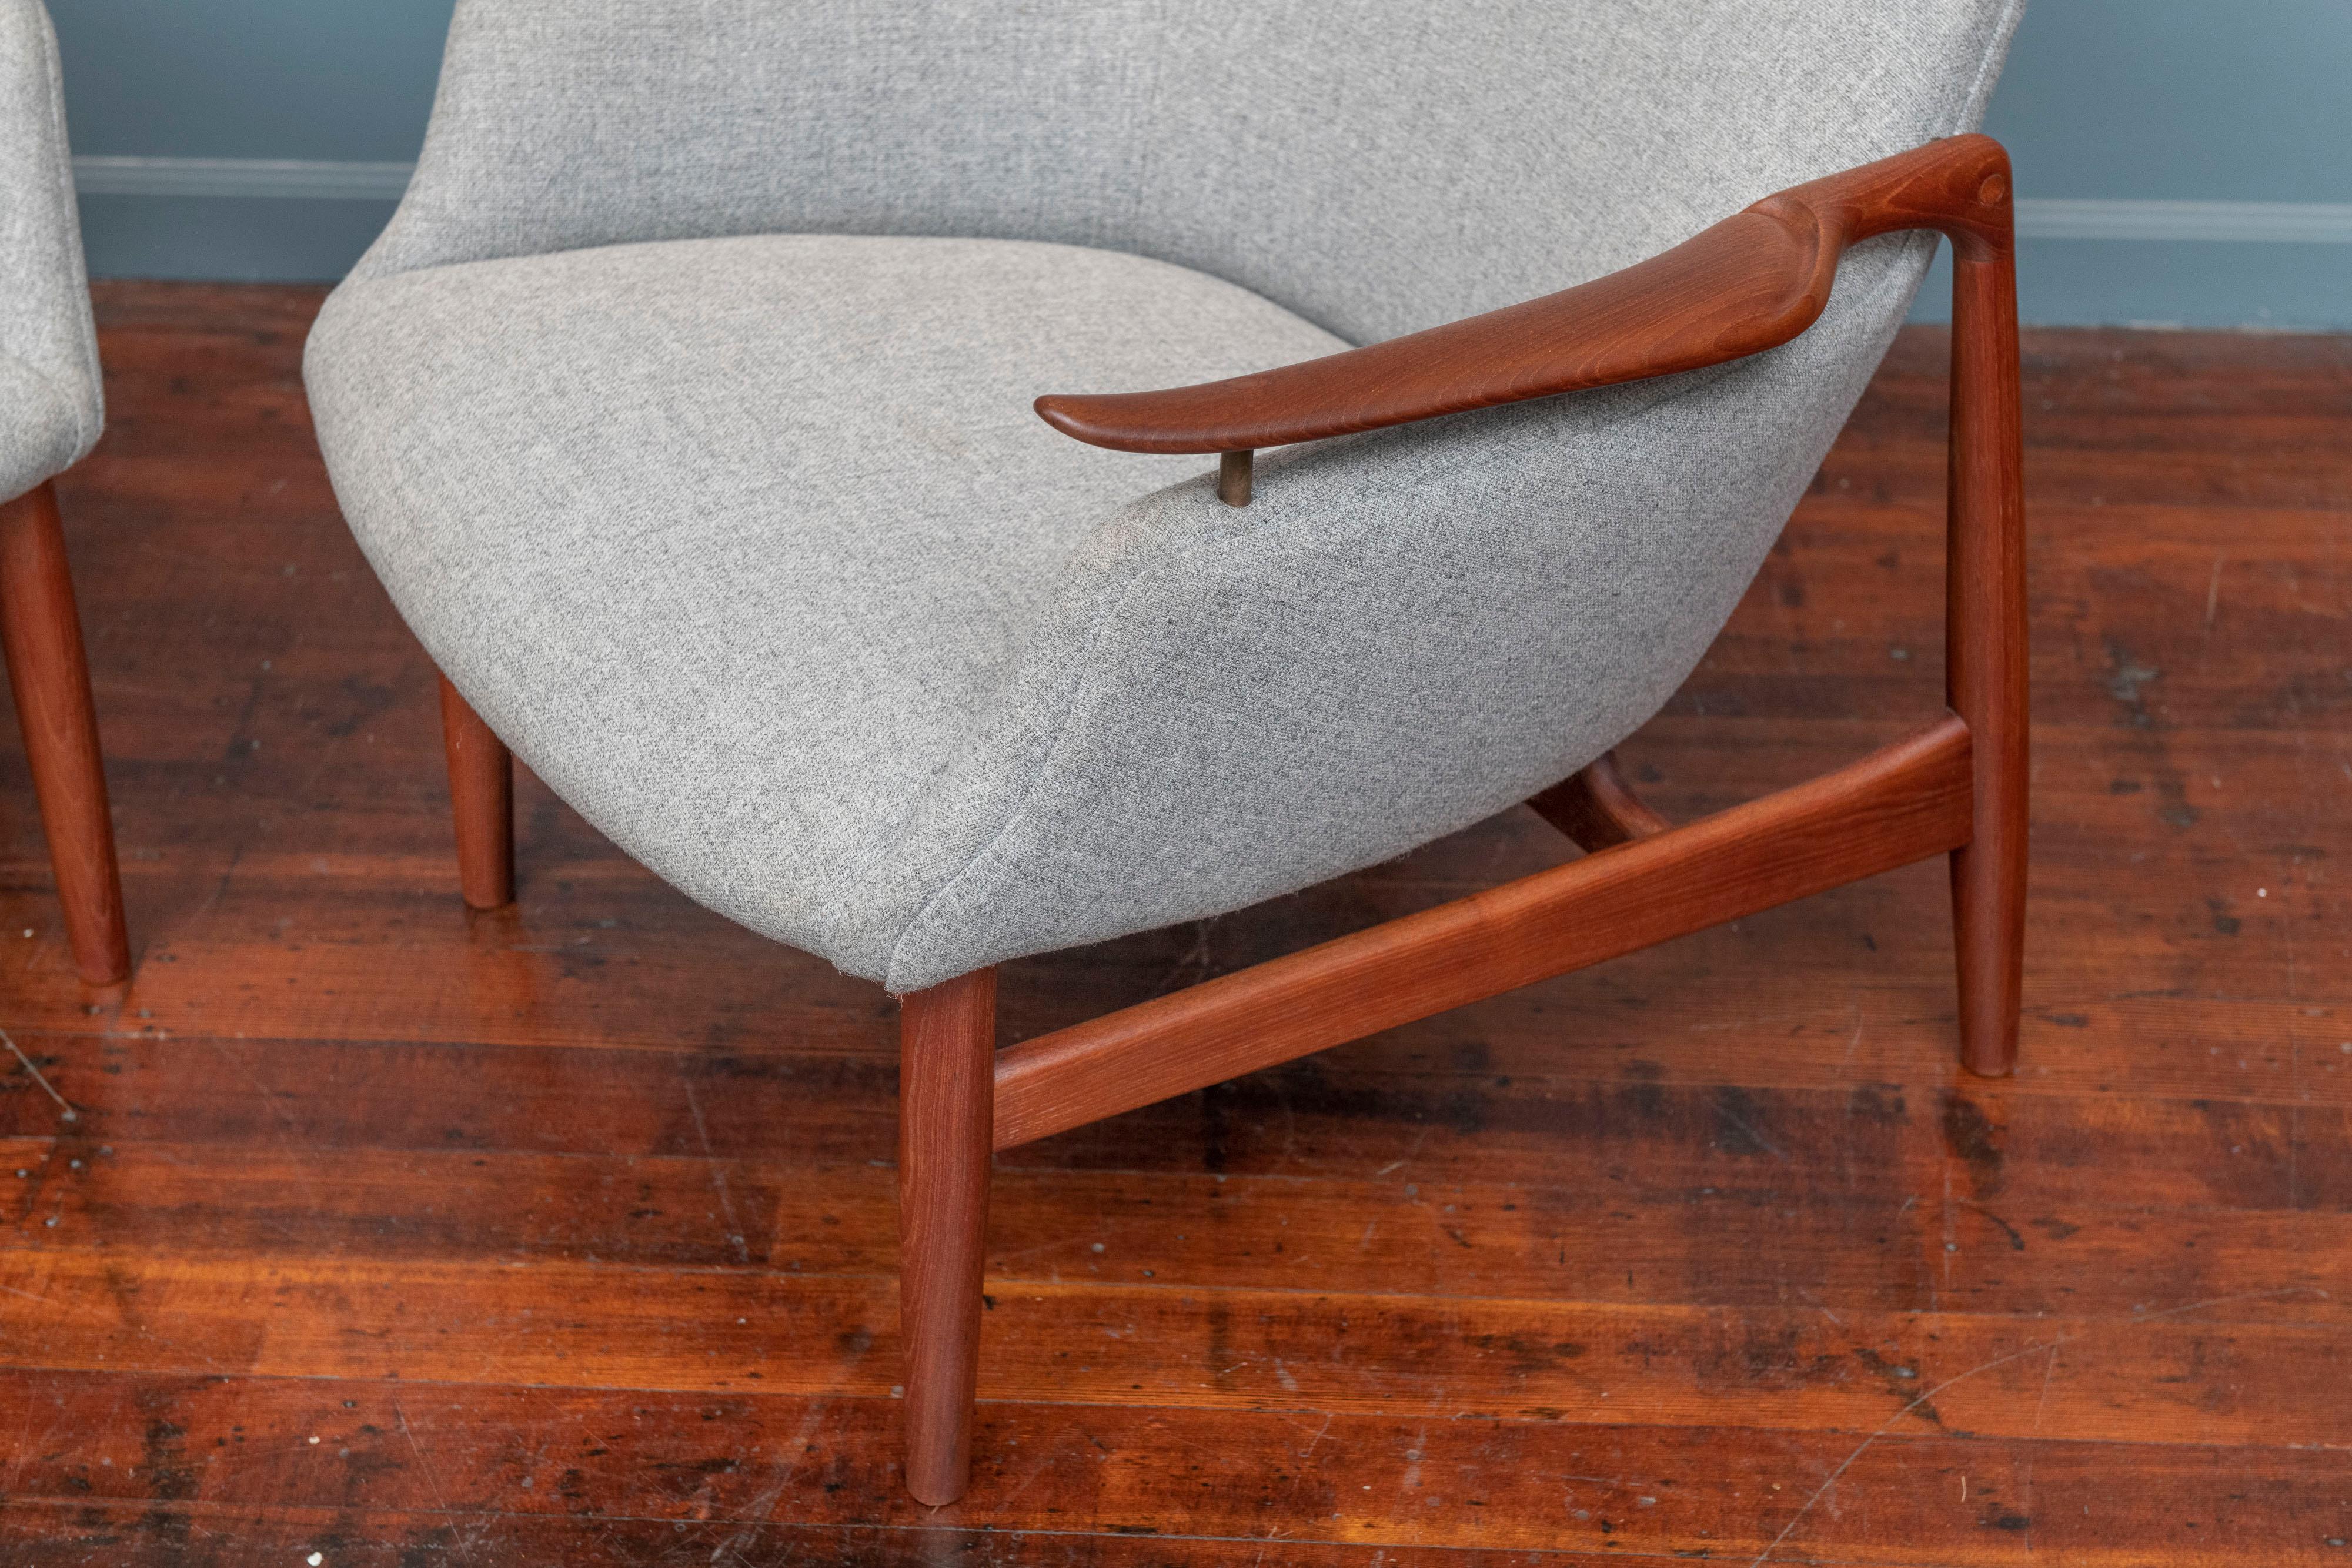 Finn Juhl design NV-53 teak lounge chairs, stamped Niels Vodder, Denmark. Matched original pair of chairs from the original owner newly refinished and upholstered in Danish wool. 
Both chairs are branded with manufacturer's mark, elegant and comfy